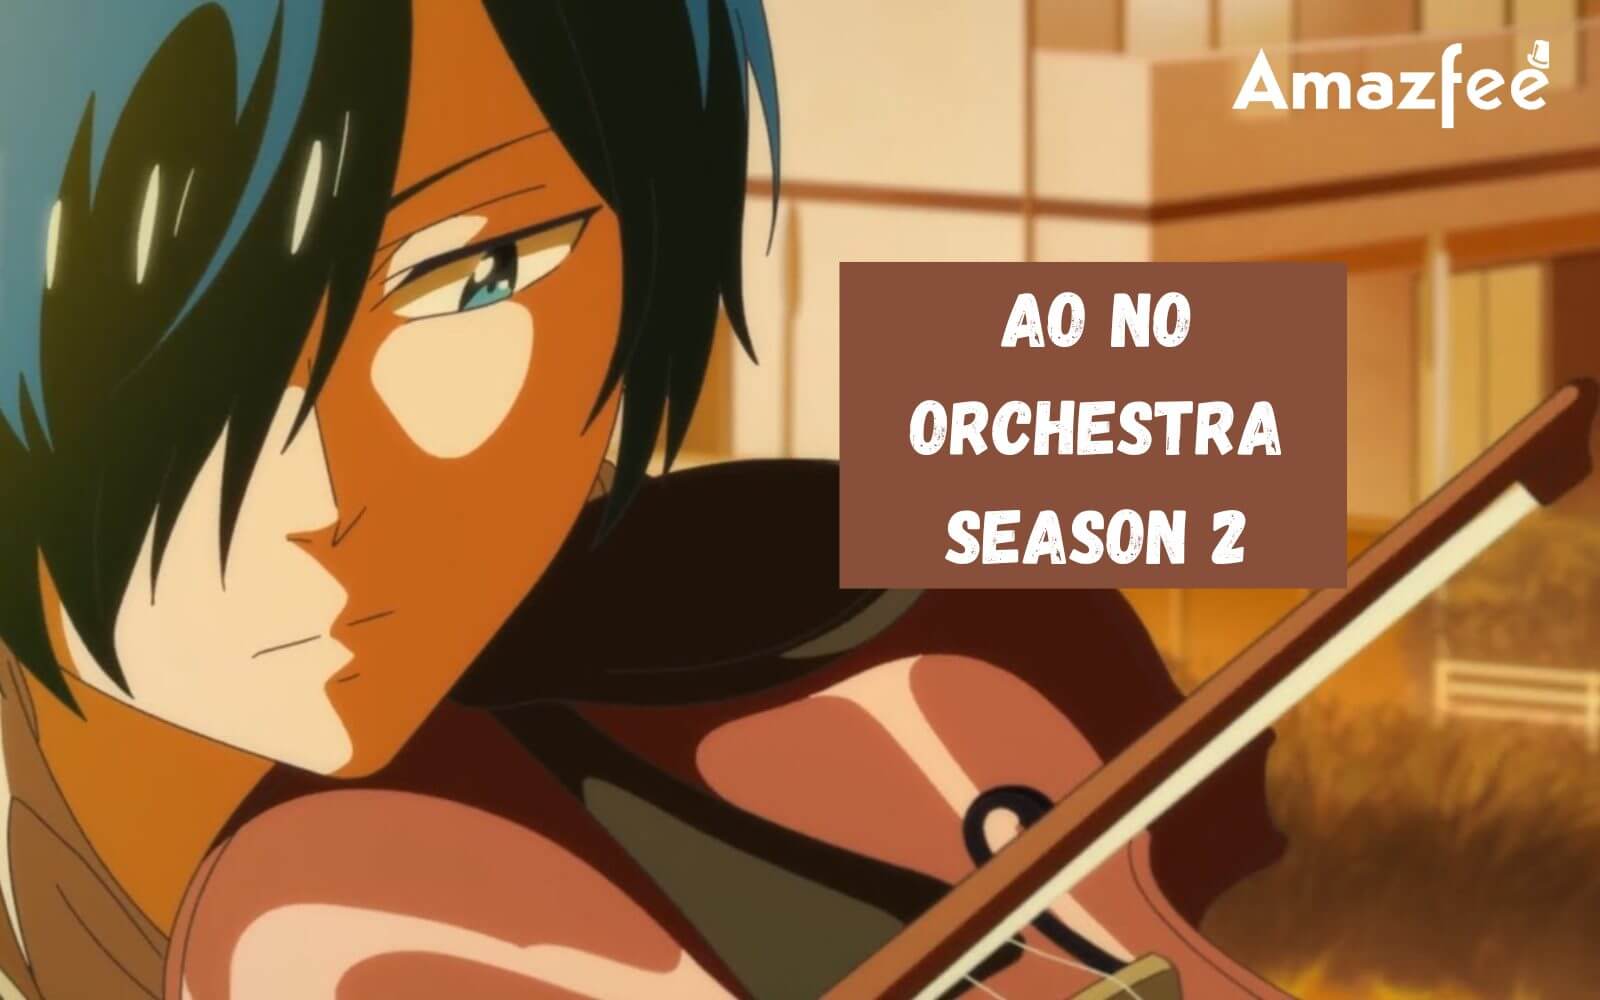 Upcoming Event] Symphonic Anime IV by MPO